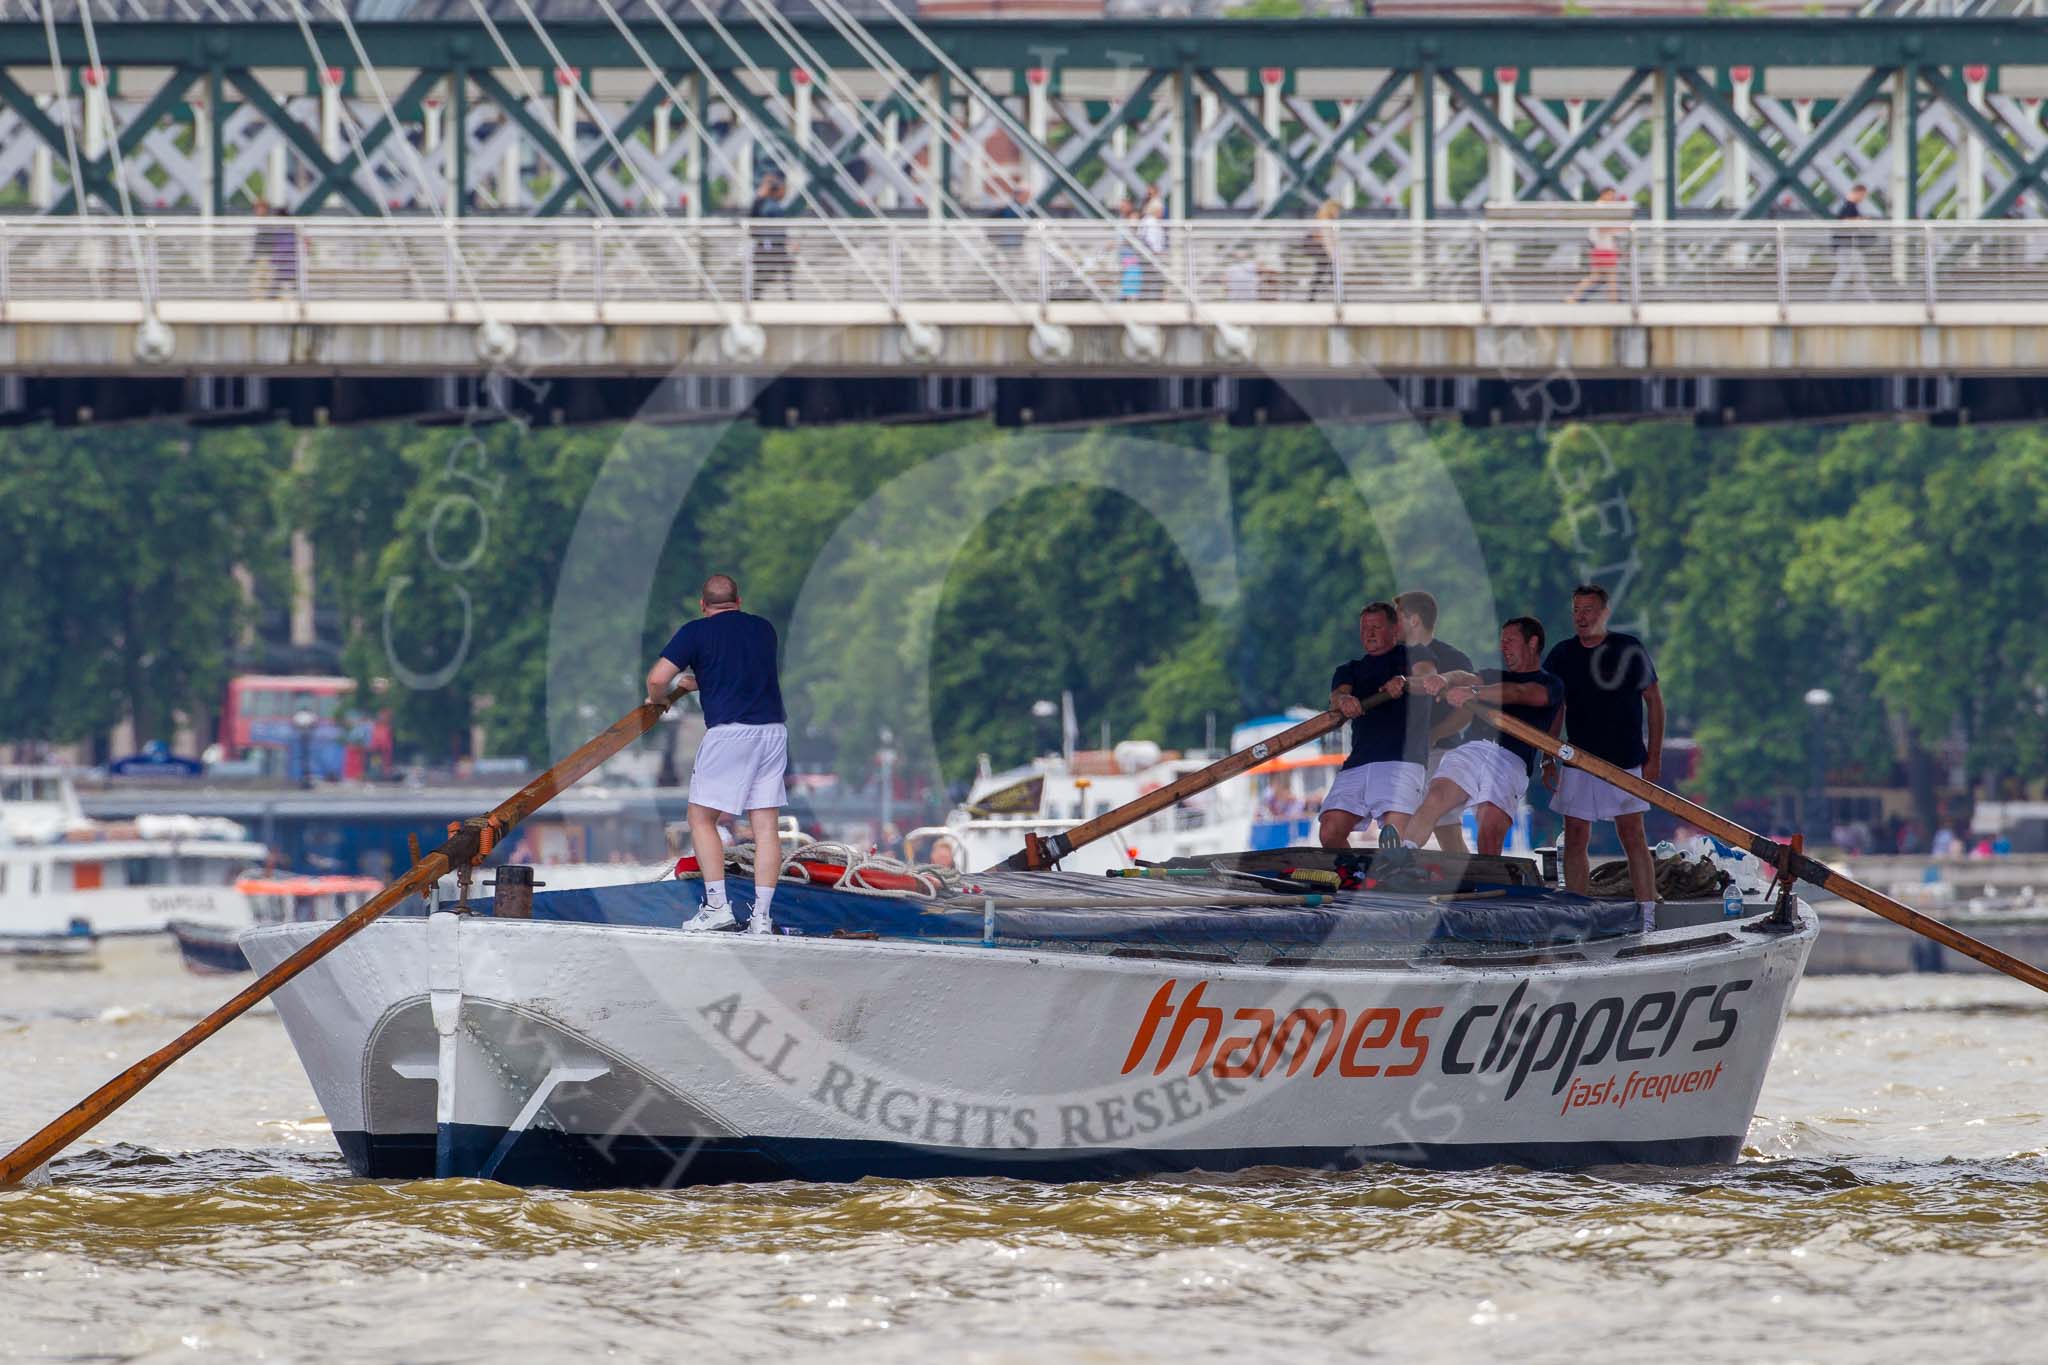 TOW River Thames Barge Driving Race 2014.
River Thames between Greenwich and Westminster,
London,

United Kingdom,
on 28 June 2014 at 13:59, image #356